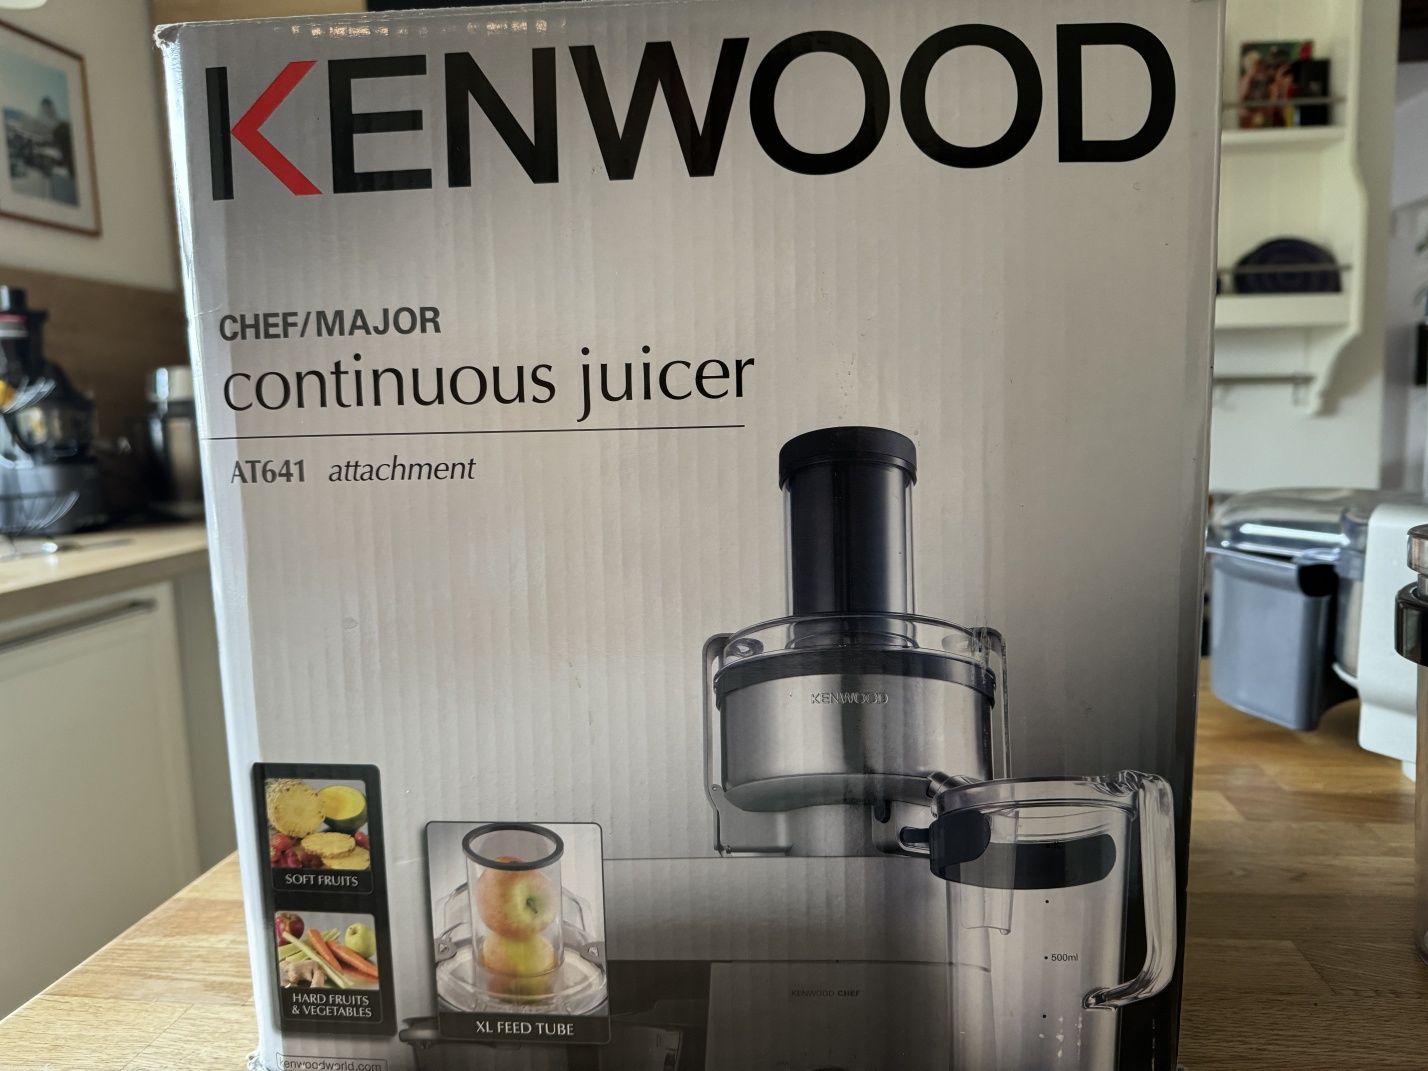 Kenwood Chef Major Continuous Juicer AT641